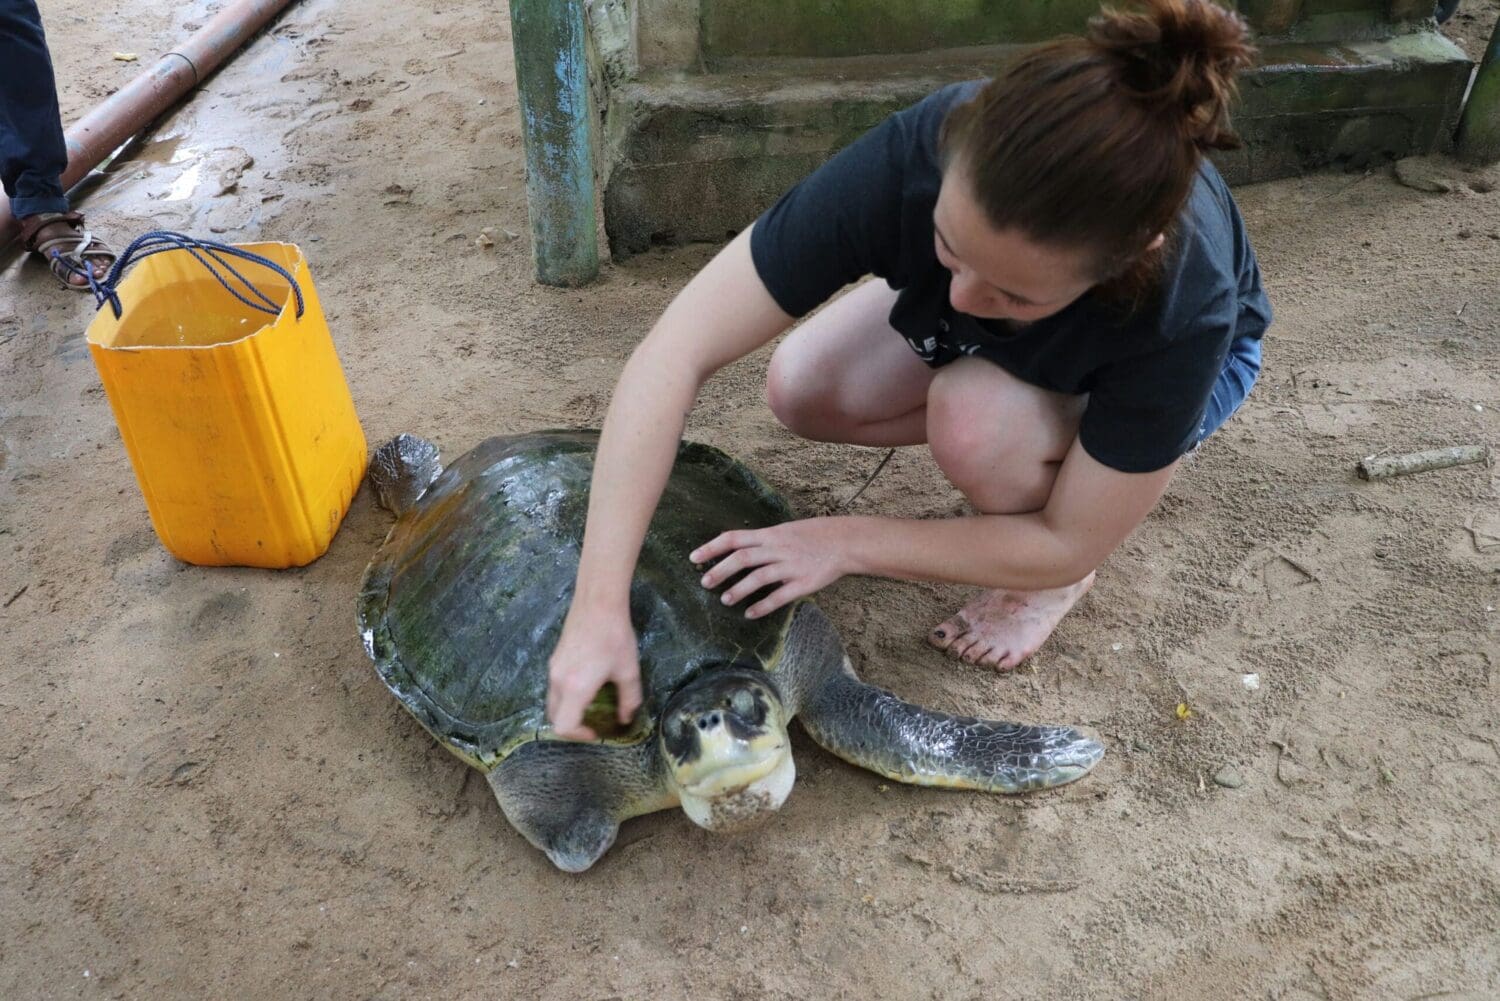 Volunteers on the turtle conservation project